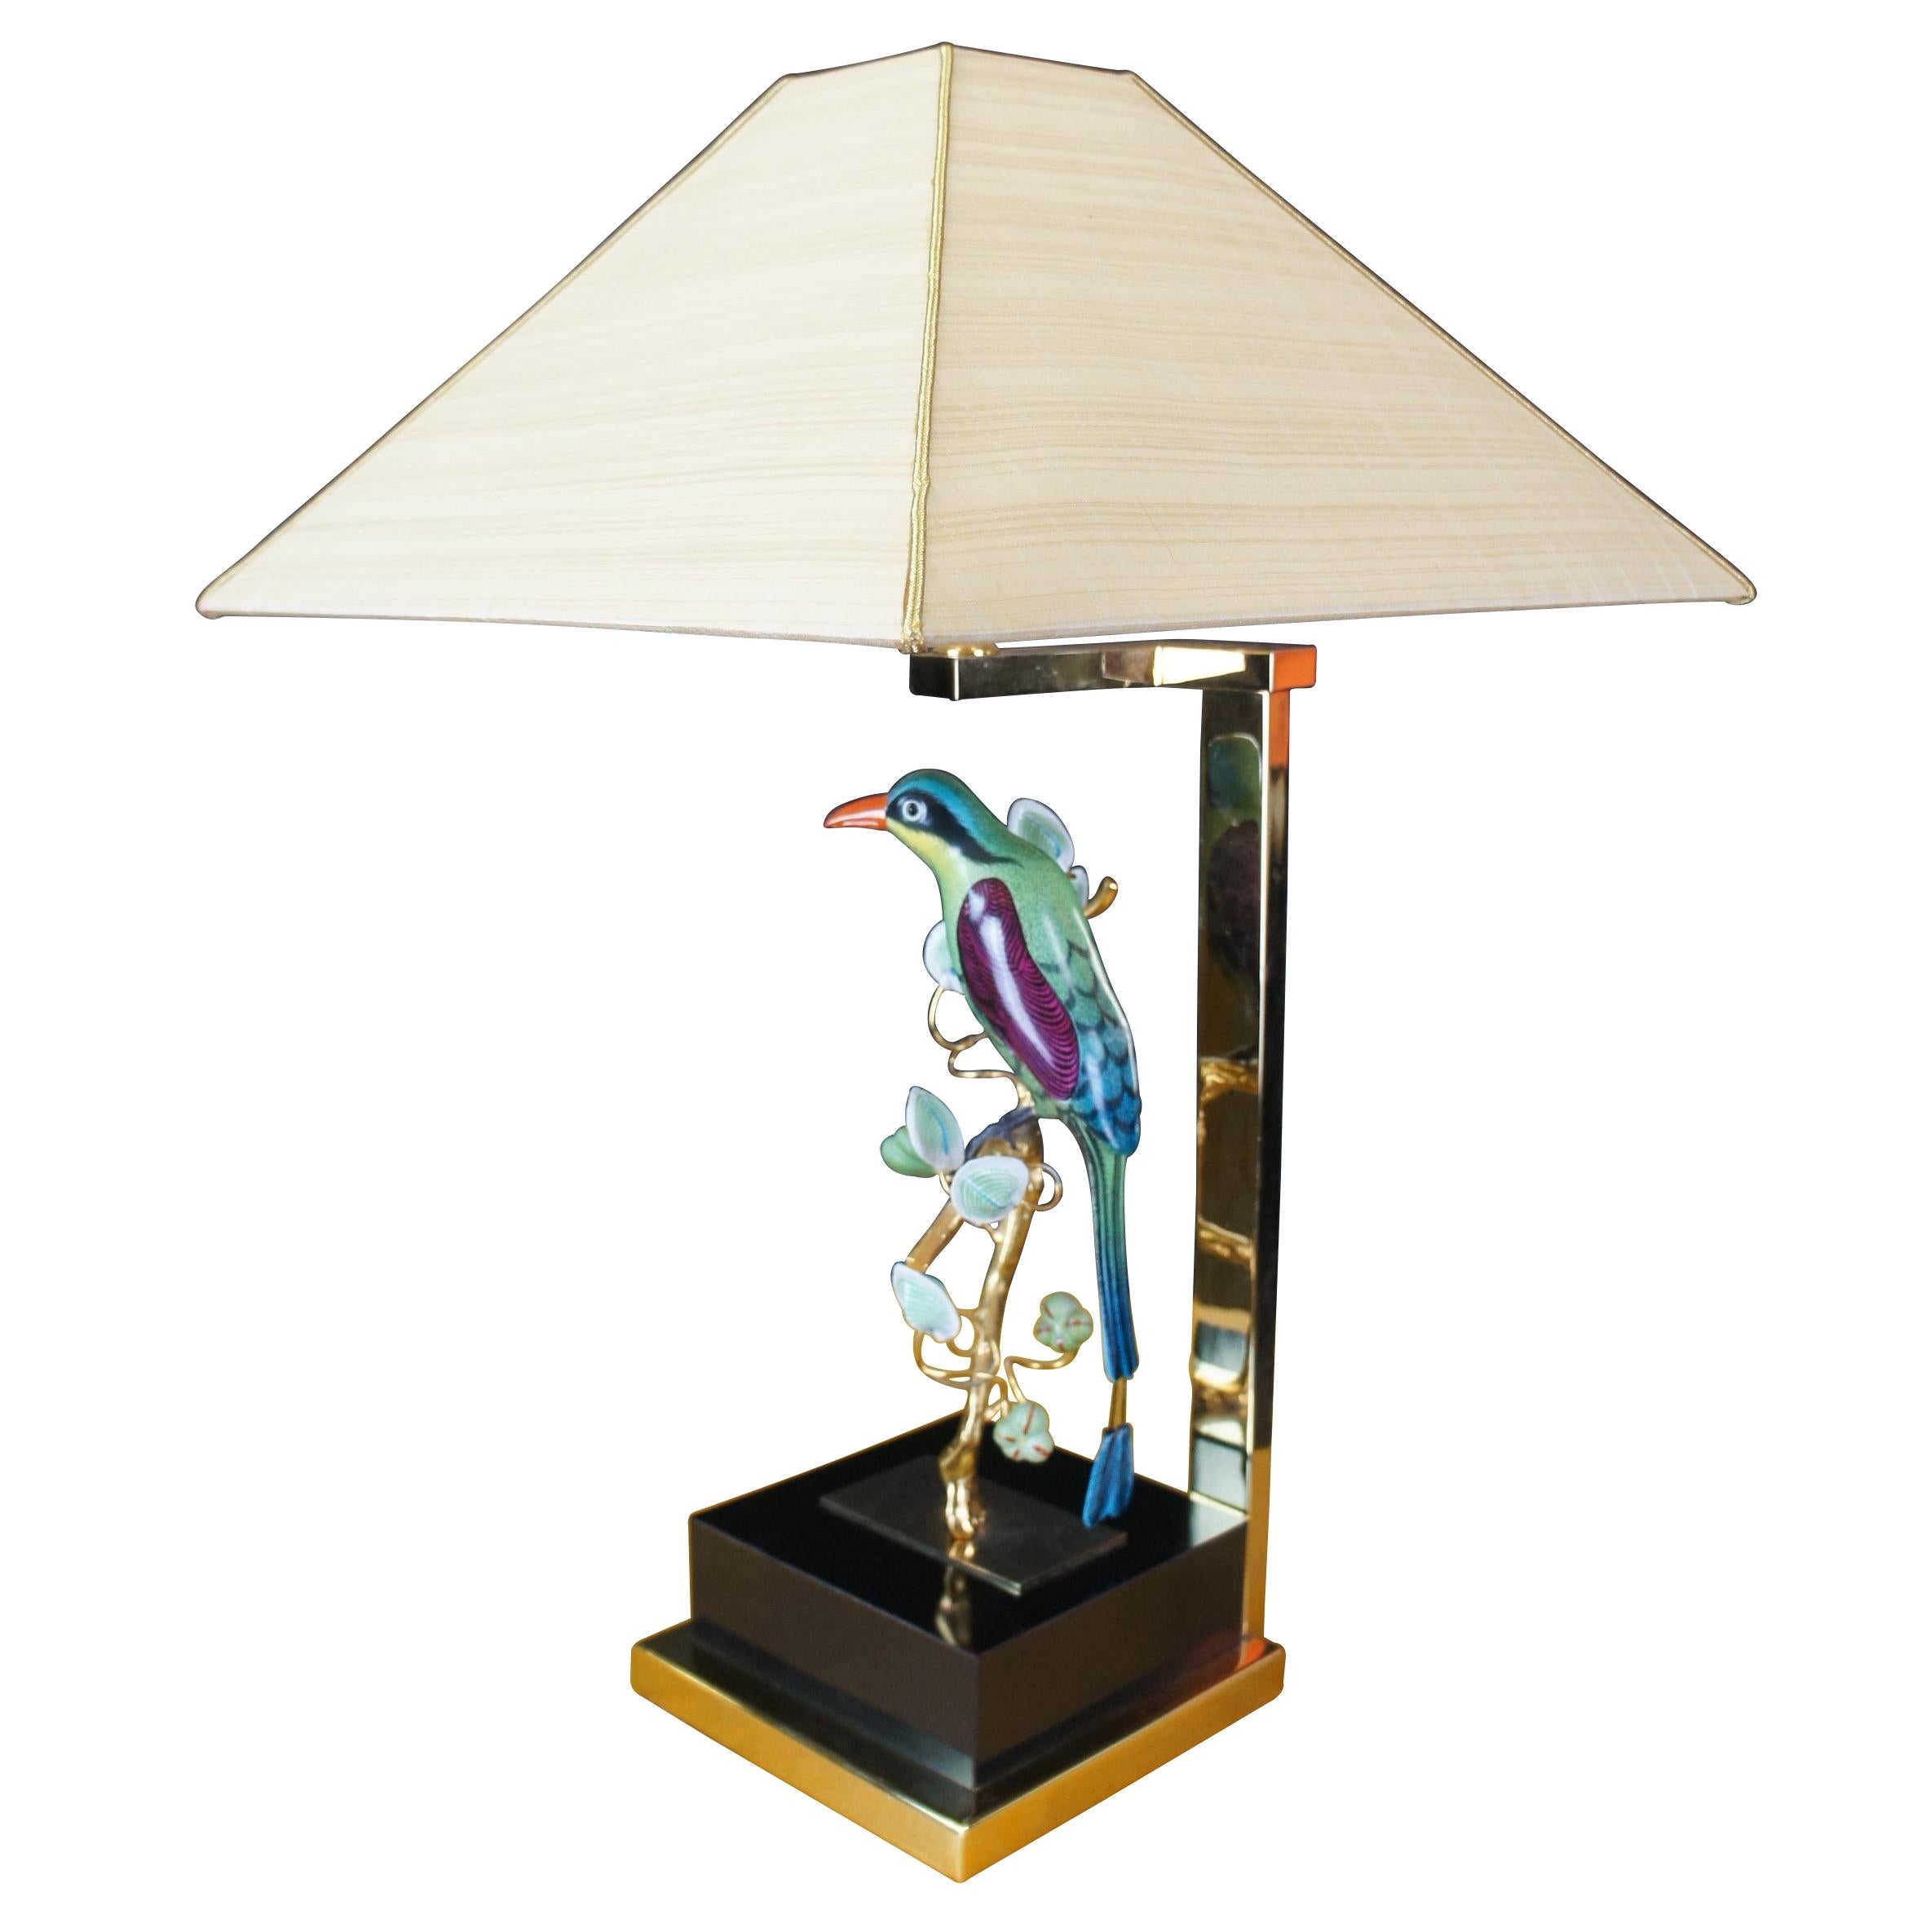 Vintage Mangani for Oggetti Italian porcelain and brass table lamp sculpture. Circa mid 1970s. Beautifuly detailed with vibrant colors. The Parrot is perched on a gold plated branch over a black plinth and brass base. A porcelain “objet d’art”